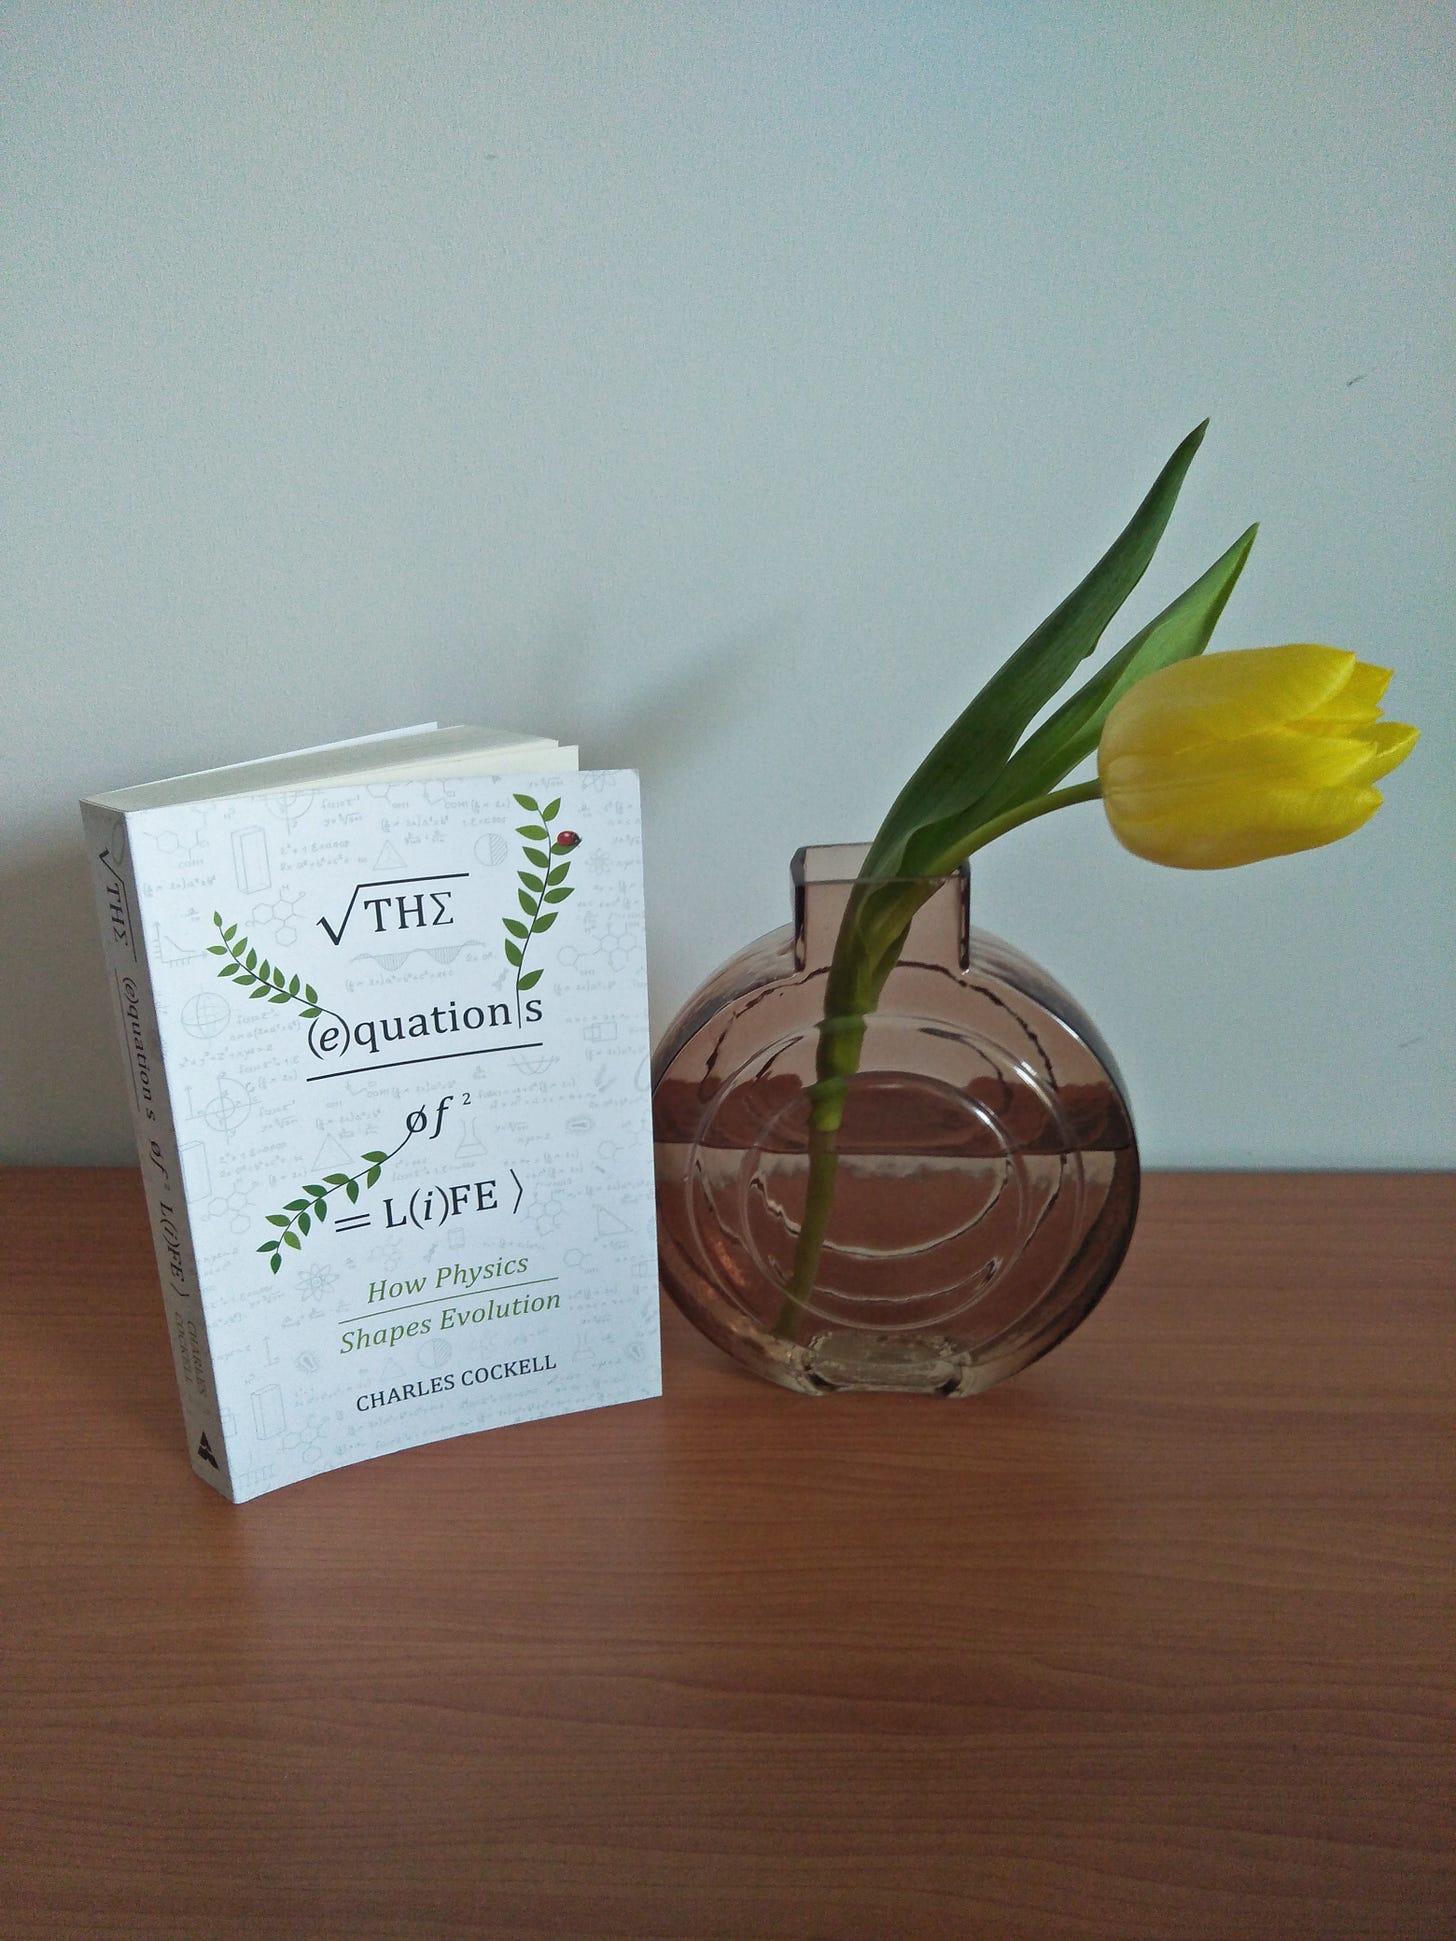 The book "Equations of Life" next to a vase containing a single yellow tulip